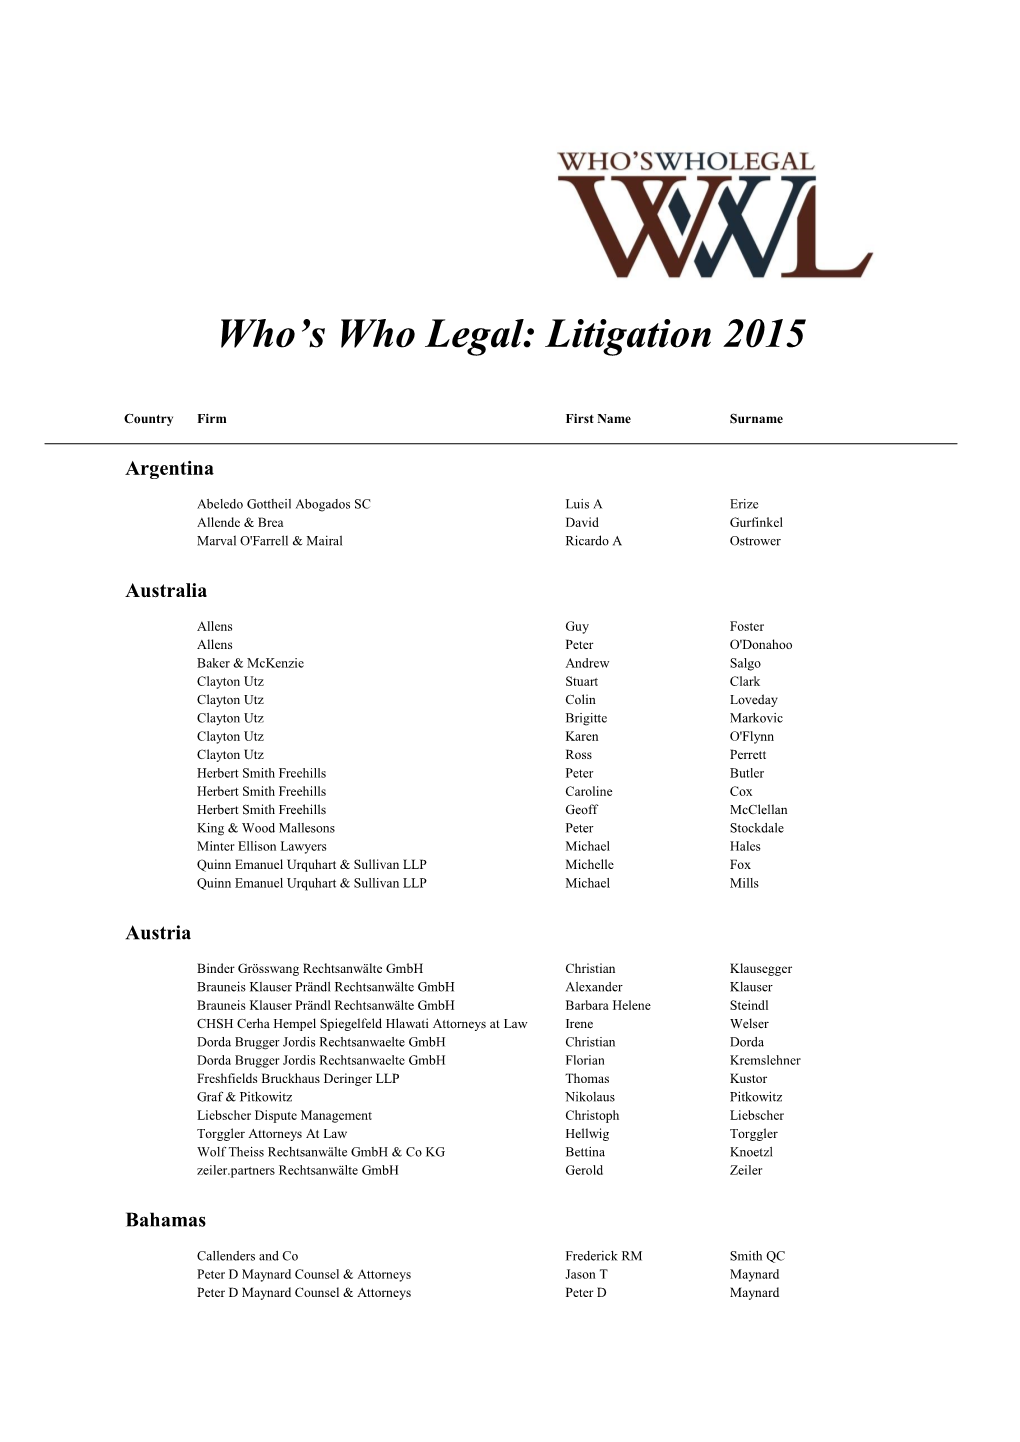 Who's Who Legal: Litigation 2015